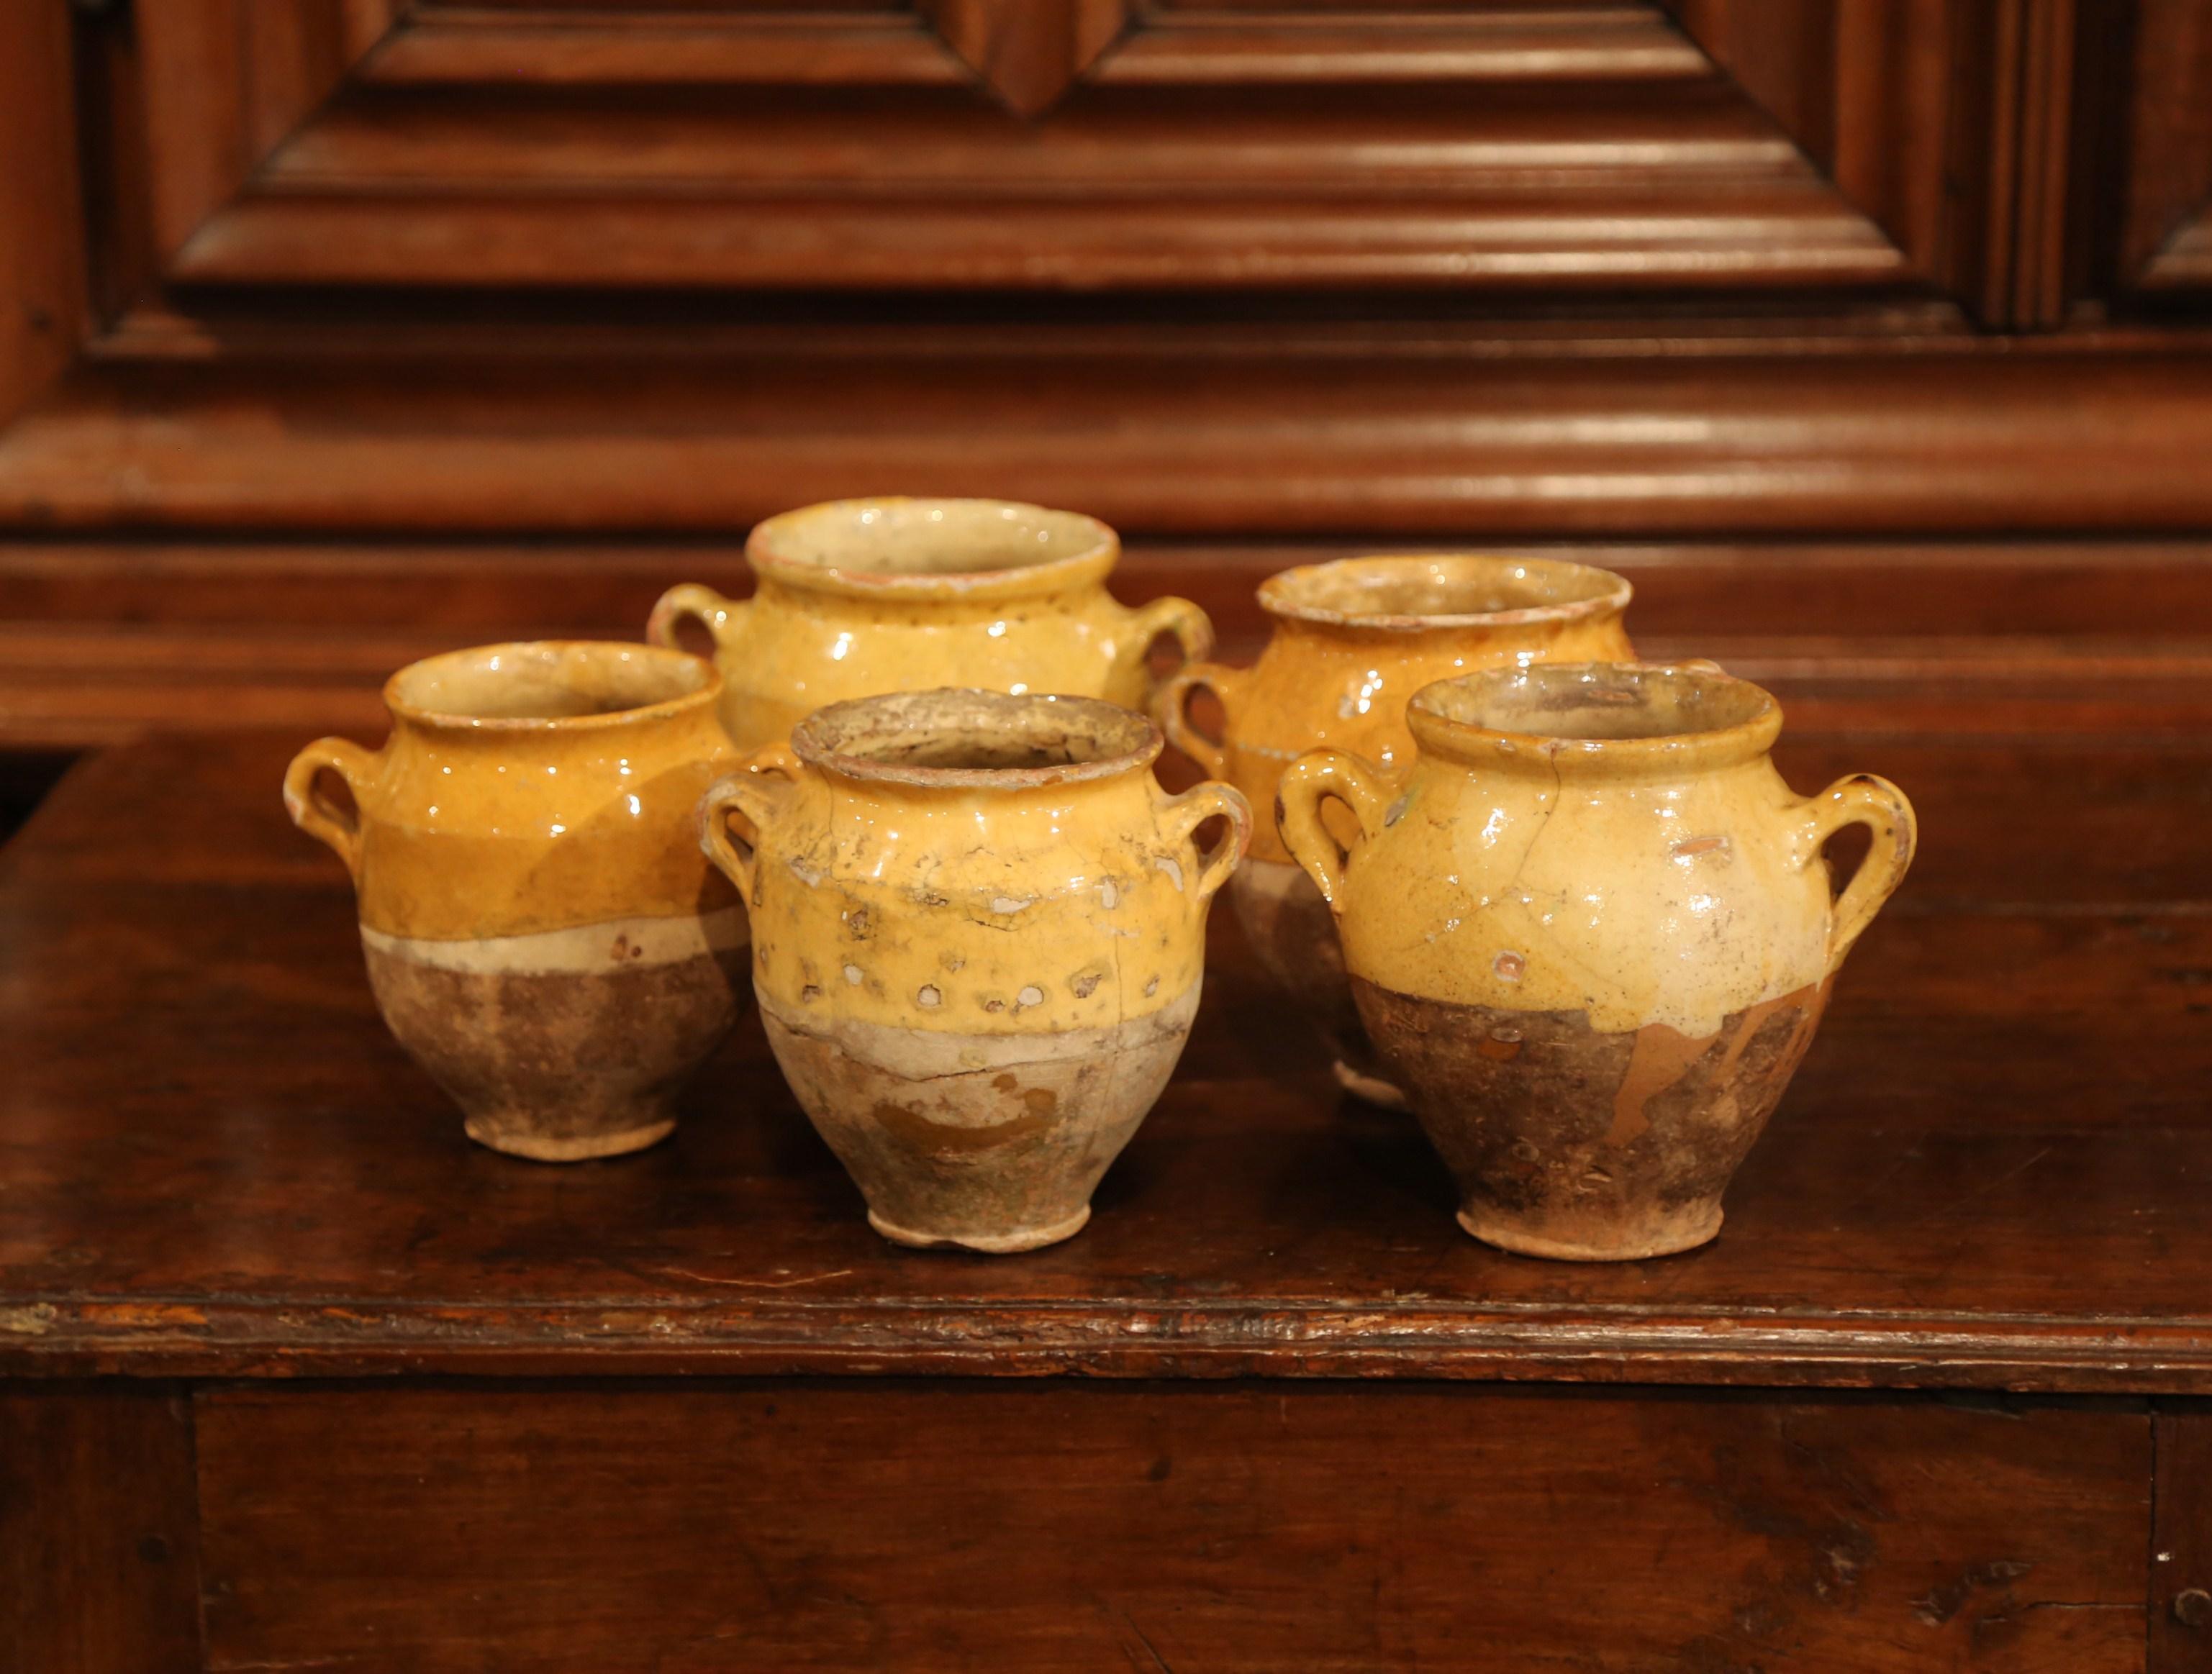 Very difficult to find in a small-scale, each of these antique confit pots were found and crafted in the southwest region of France, circa 1880. Made of earthenware, these traditional vessels were once used daily in the French country home for